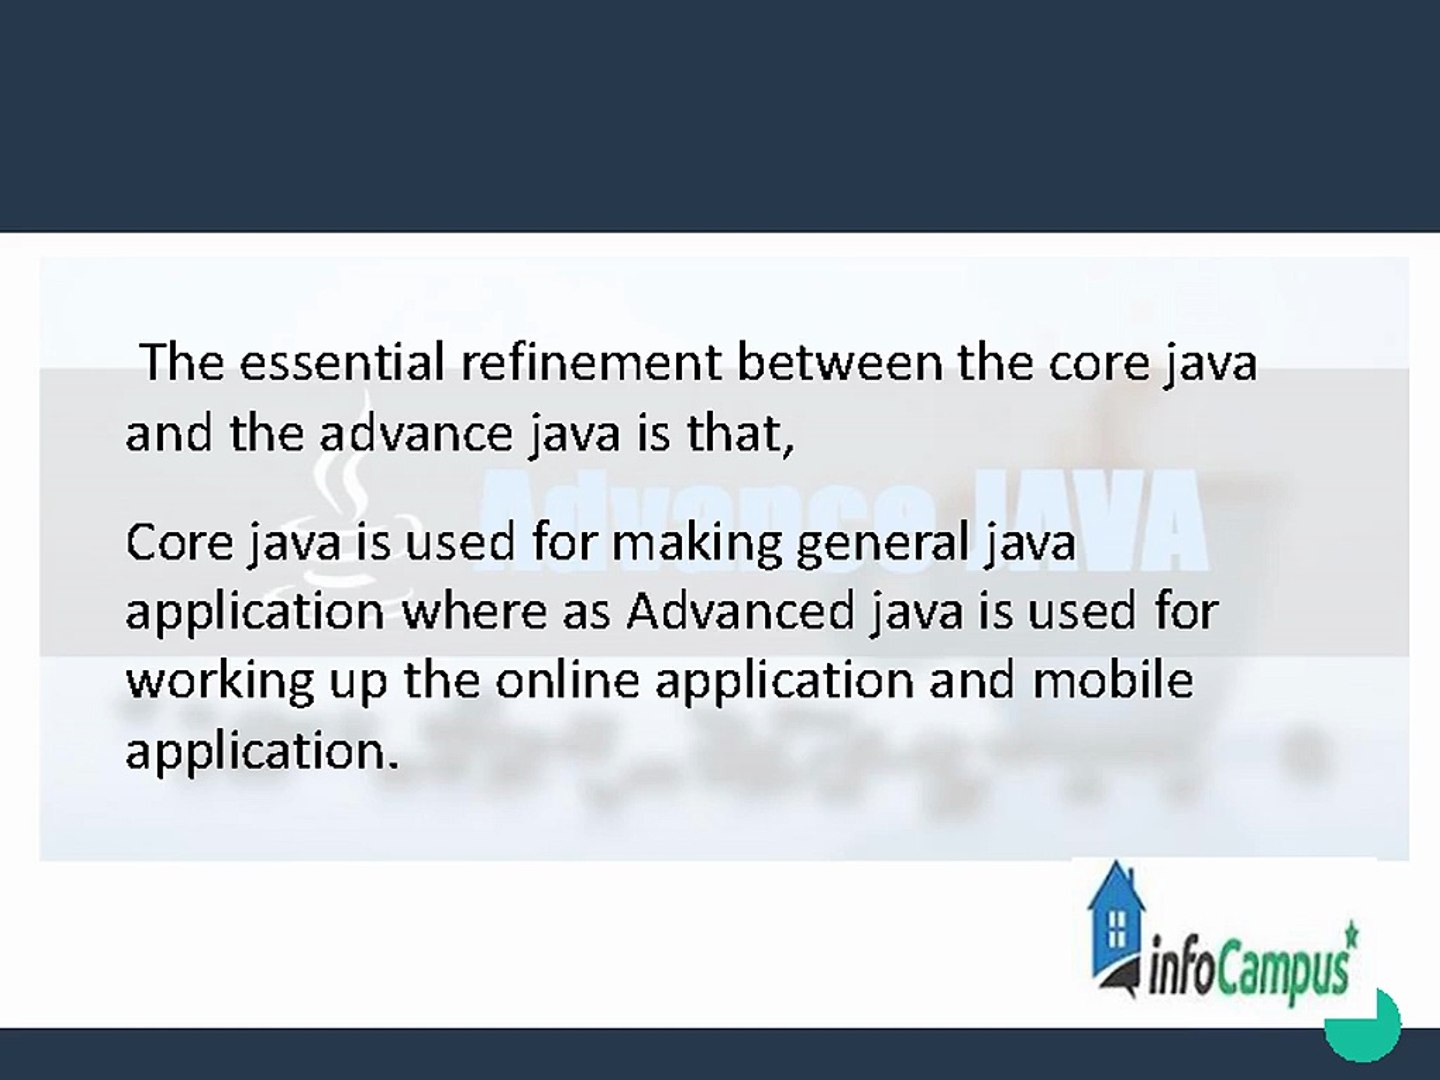 Difference between Core Java and Advance Java